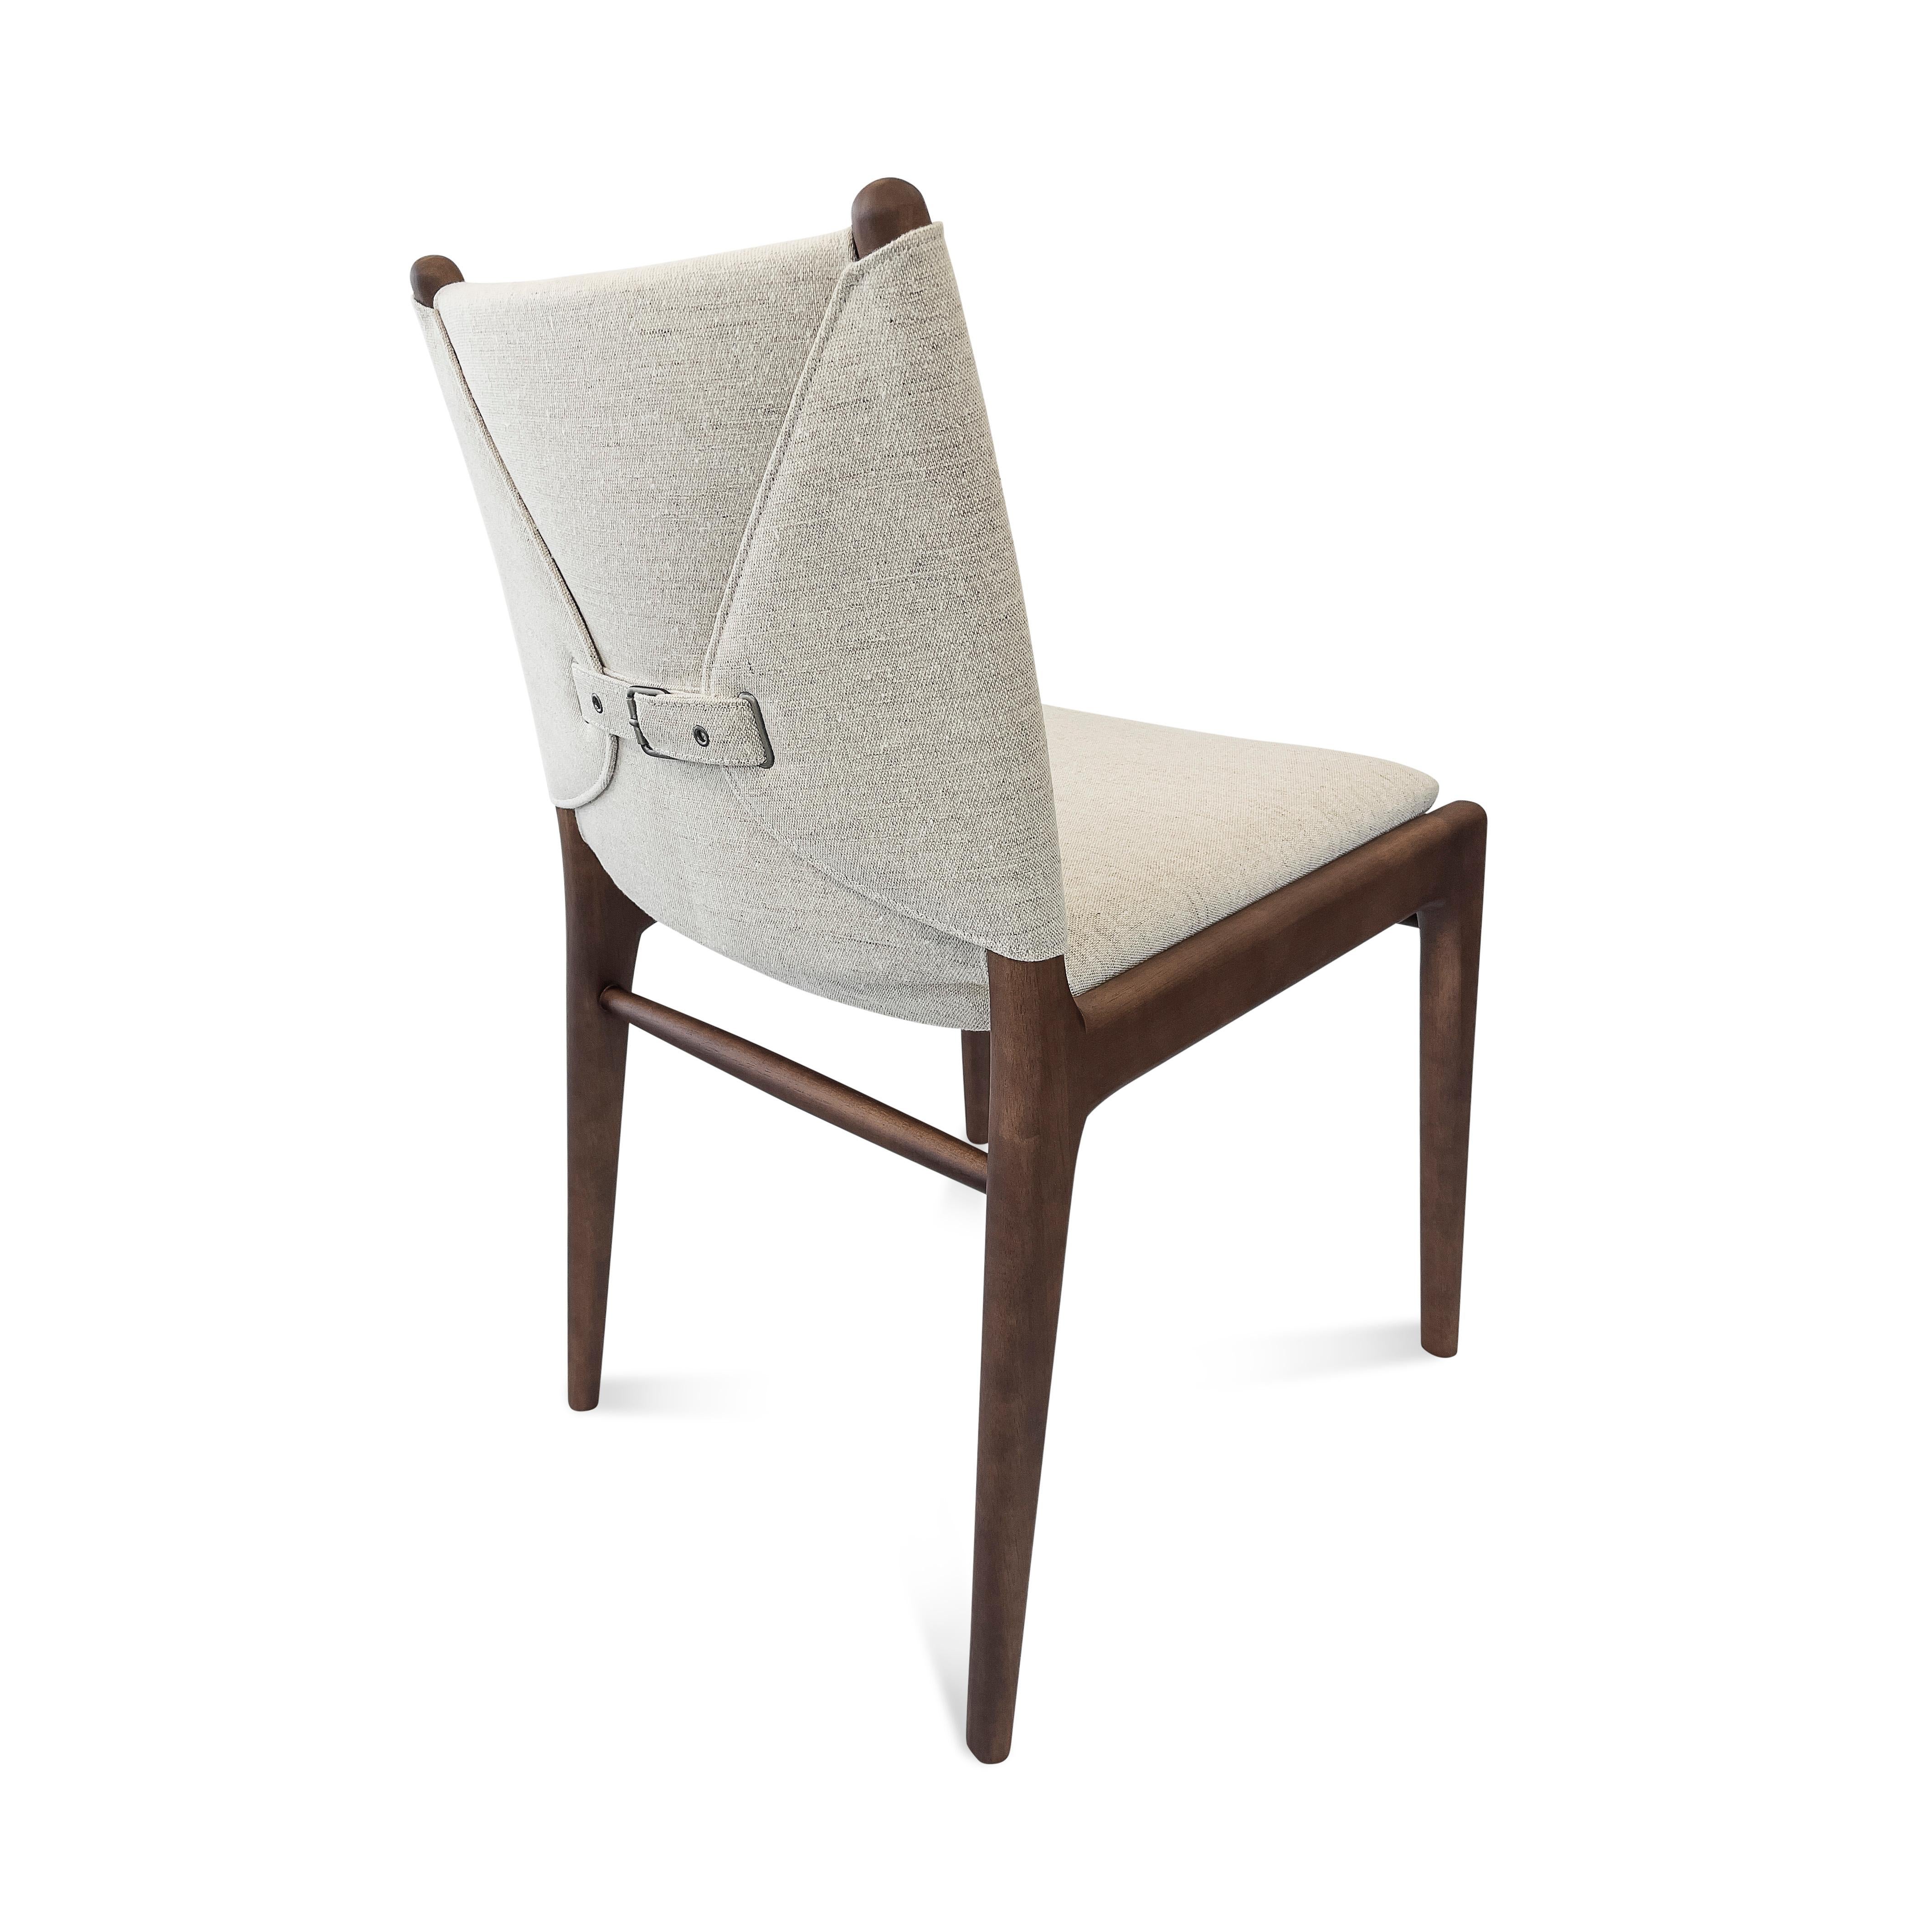 Upholstery Cappio Dining Chair in Walnut Wood Finish with Light Beige Fabric, set of 2 For Sale